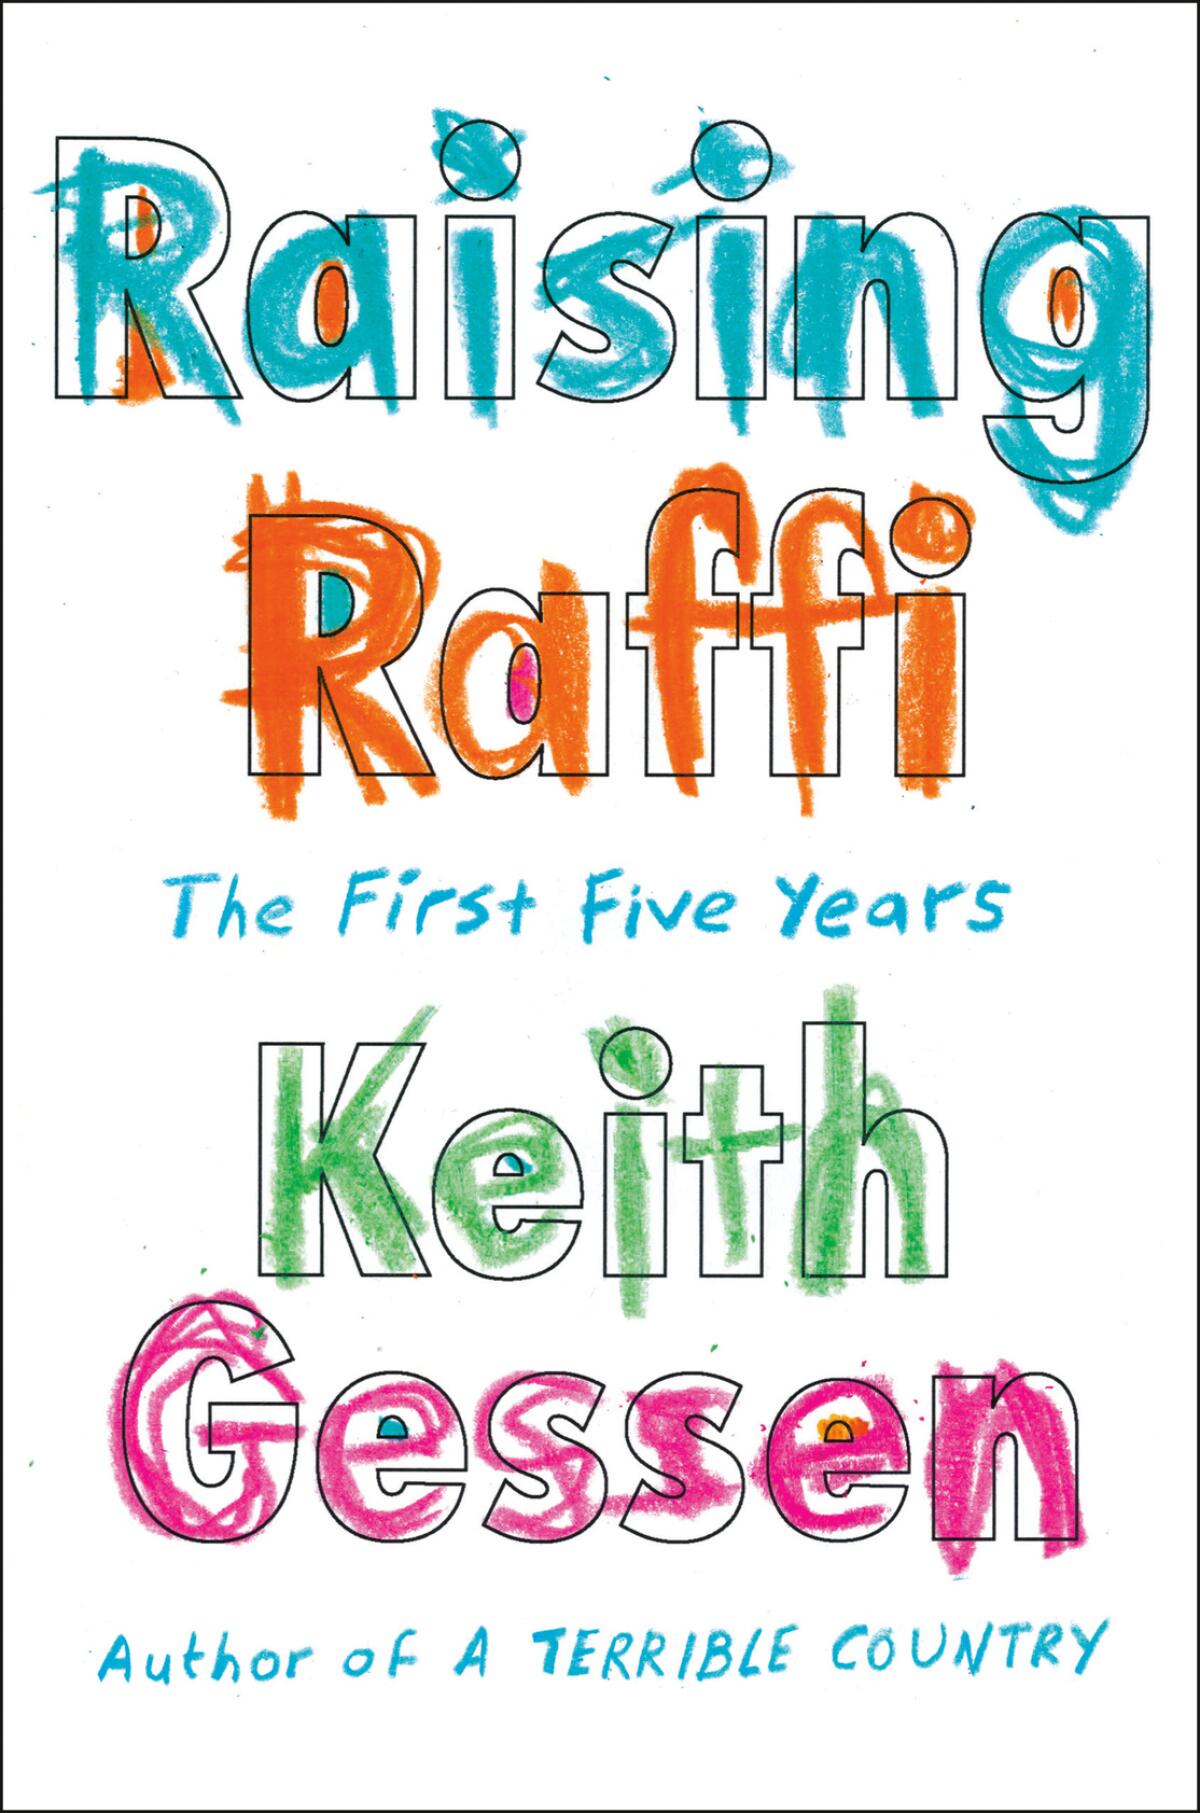 The cover of the book "Raising Raffi: The First Five Years," by Keith Gessen